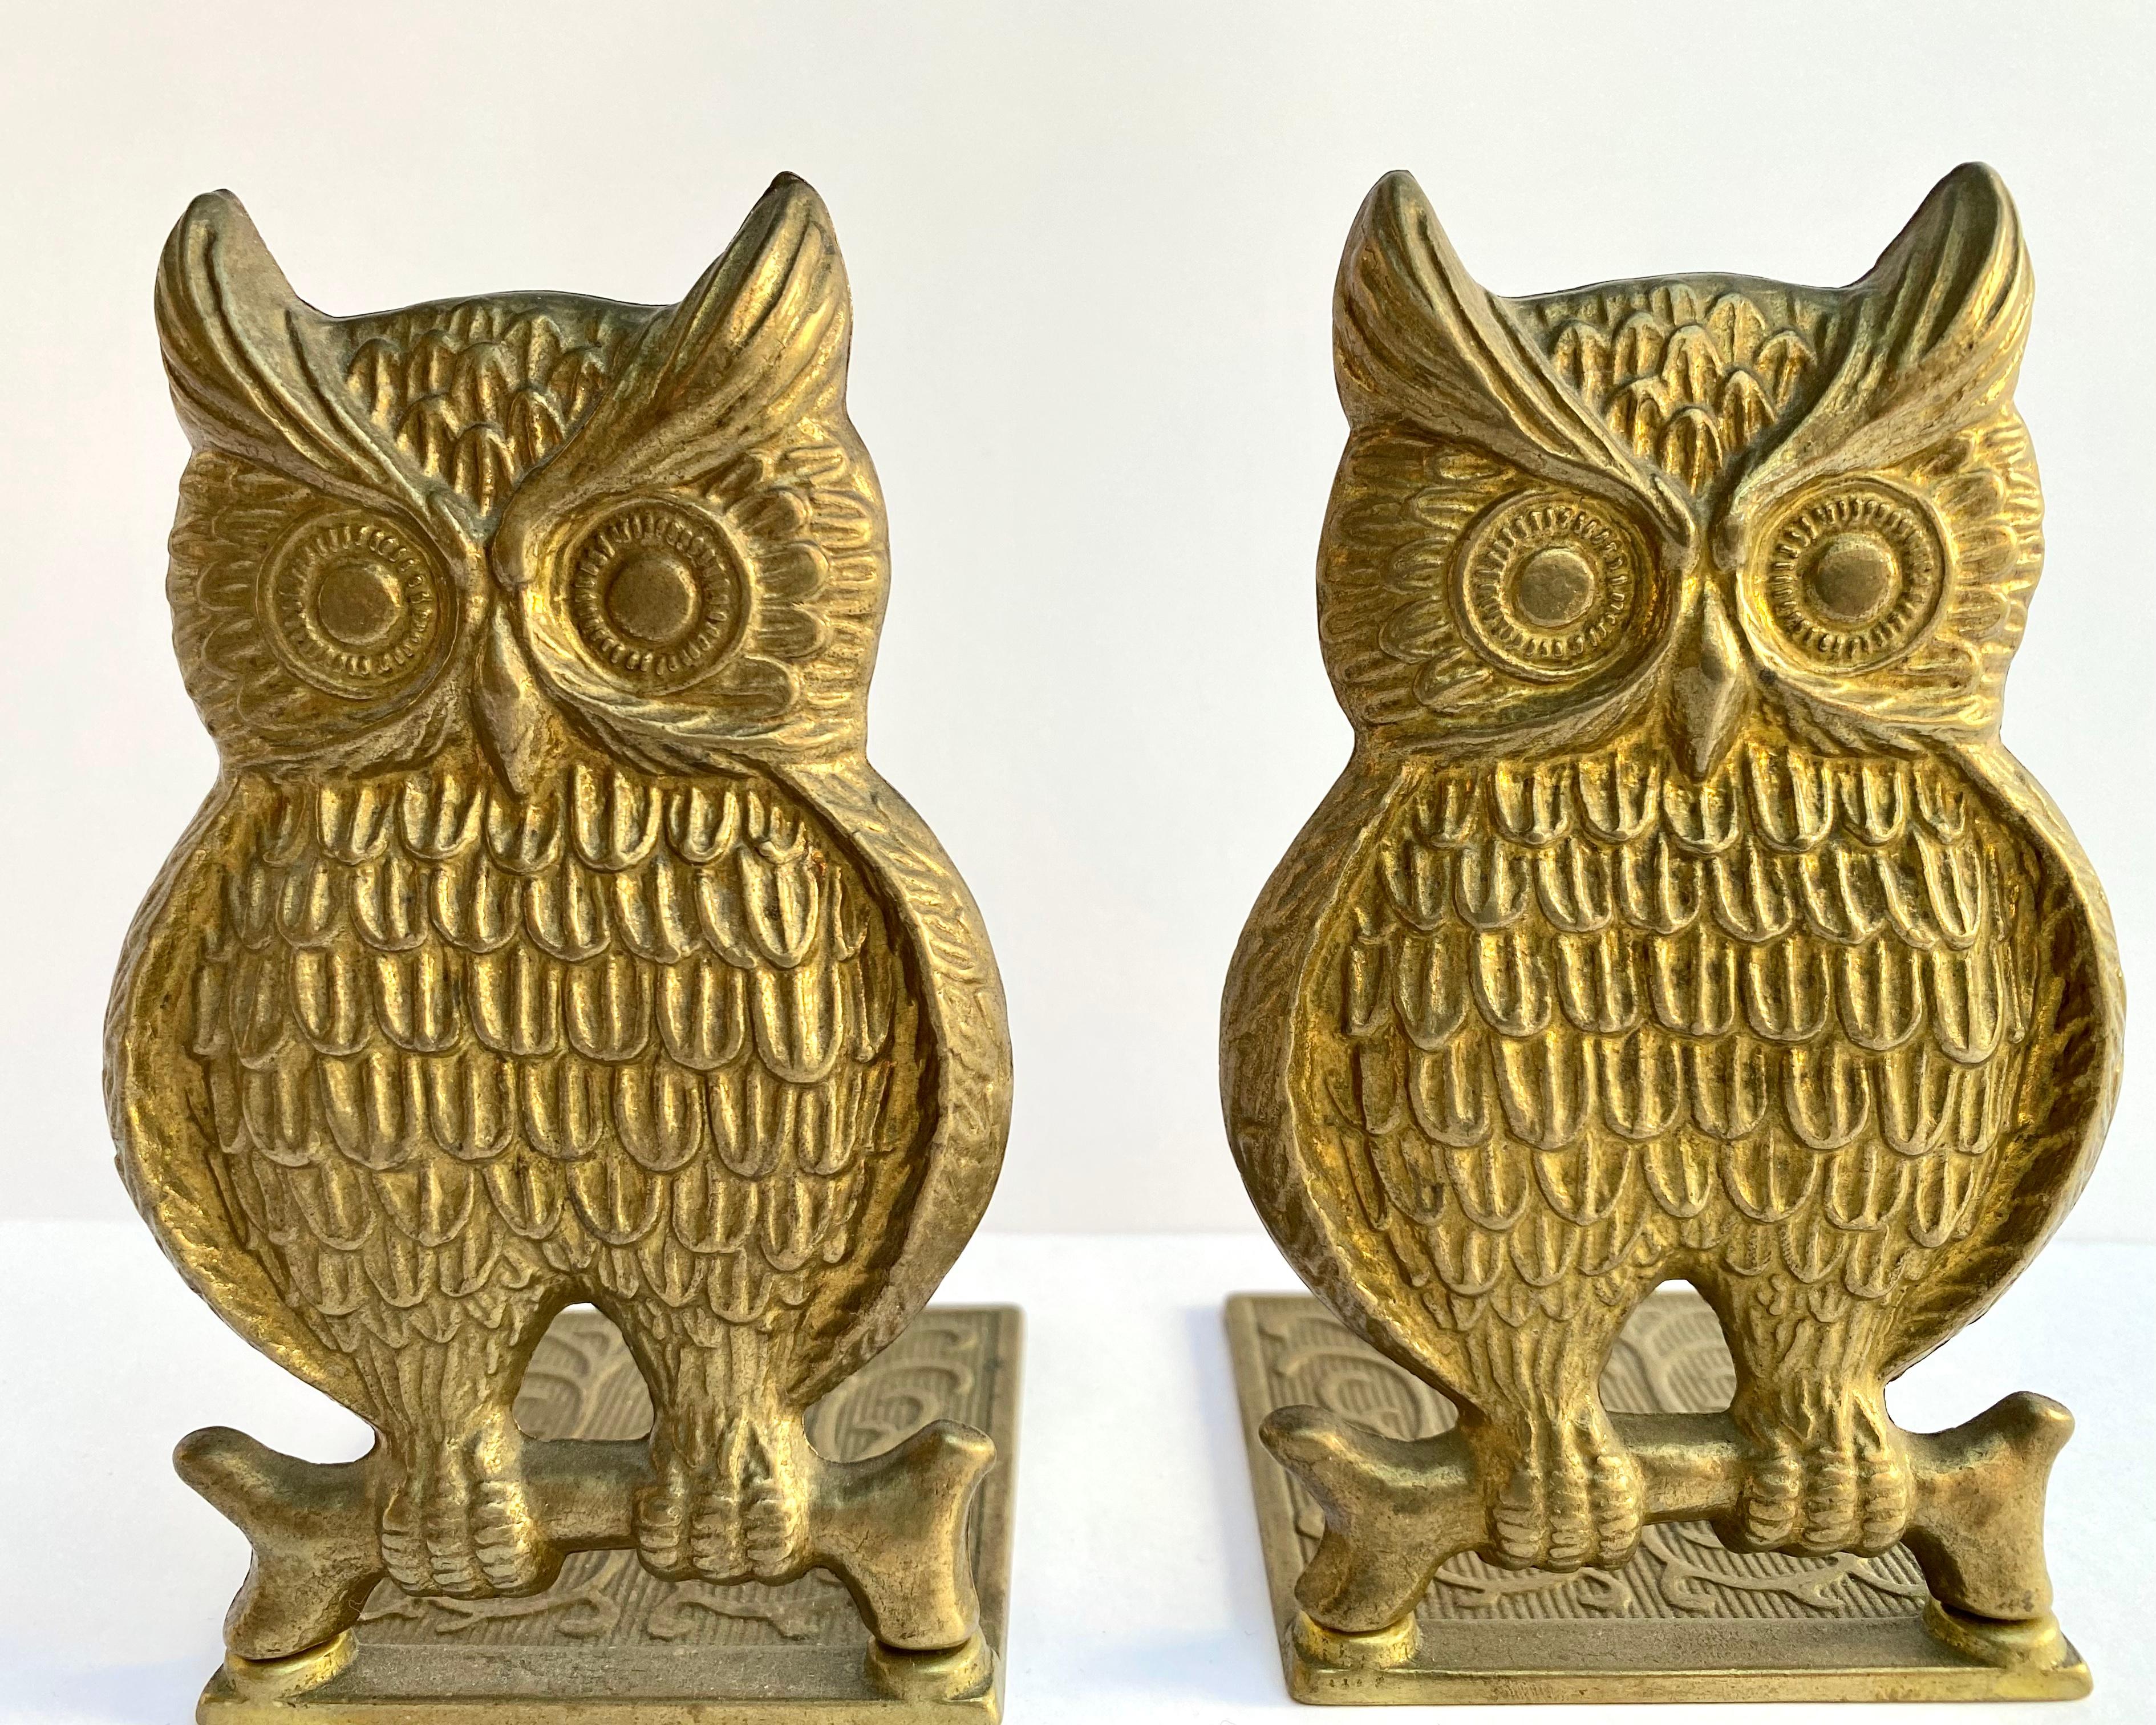 A beautiful bookend in untreated brass that will age naturally and darken over time.

Bookends Vintage Pair Solid Brass Owl Folding Bookends Ornate Mid Century Modern Wise Owl Doorstop Brass Set 2

Vintage Brass Owl Bookends

The bookends are very